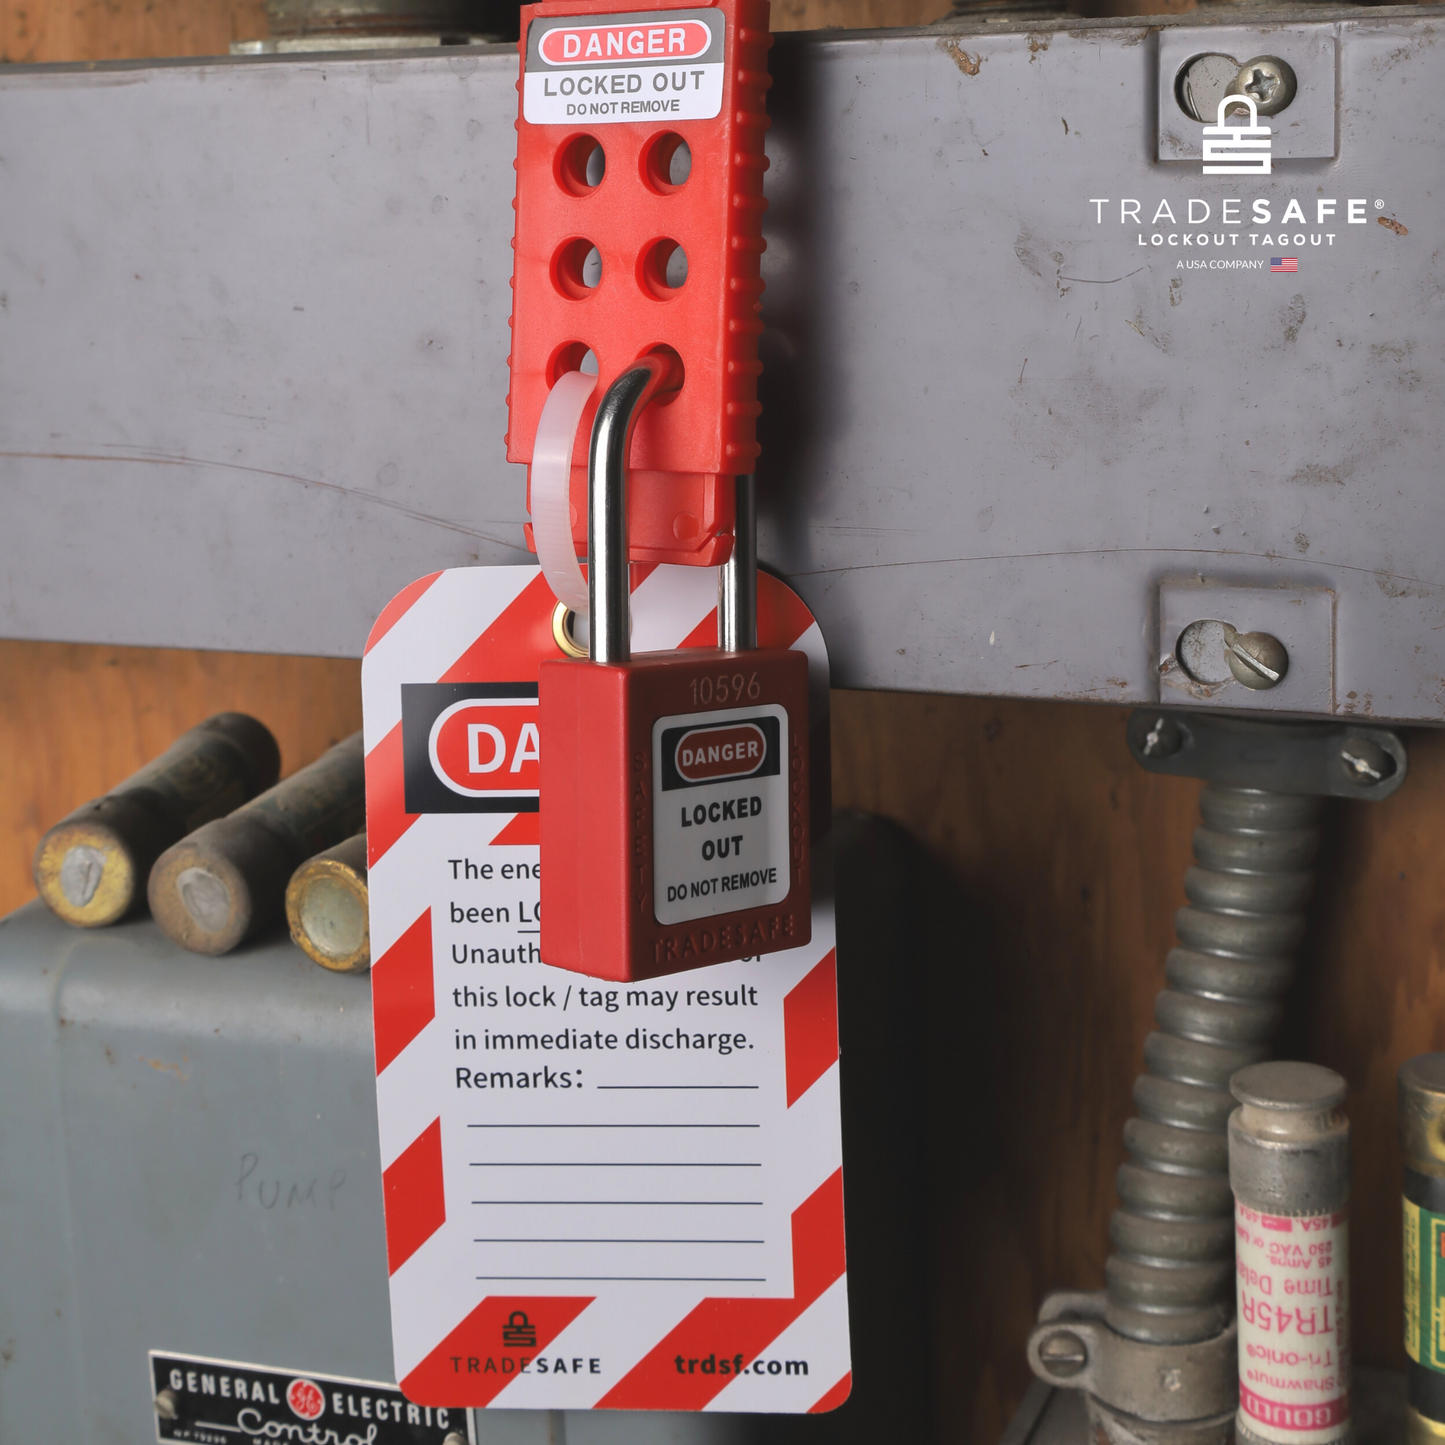 lockout tagout safety tag attached to a hasp and padlock locking out an equipment